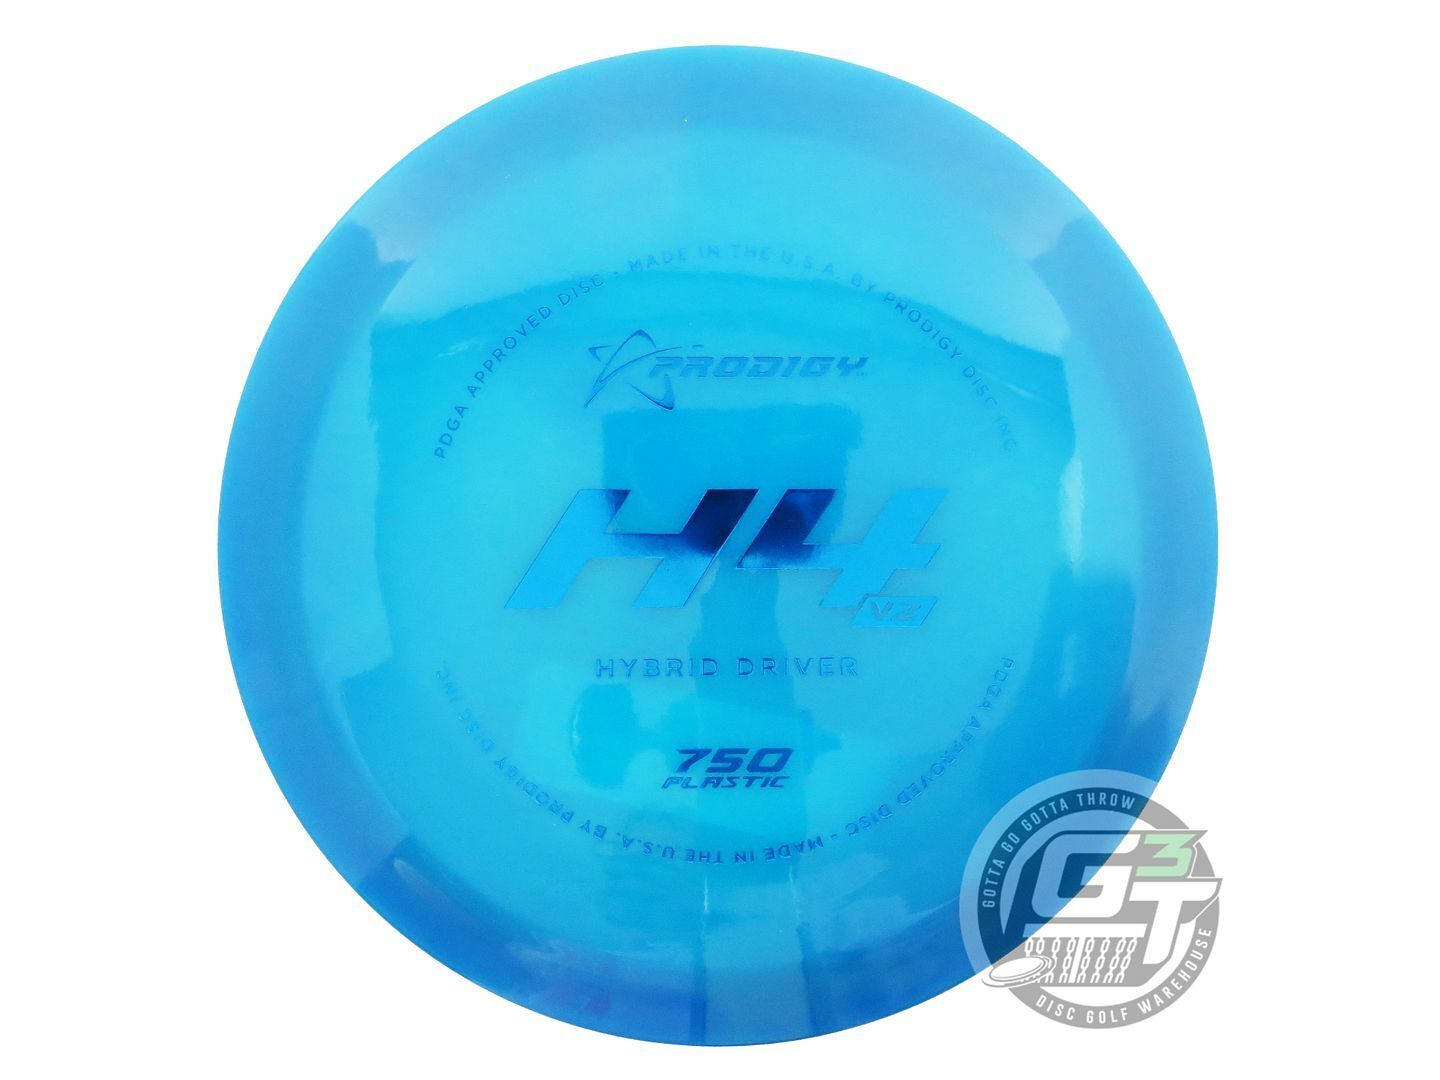 Prodigy 750 Series H4 V2 Hybrid Fairway Driver Golf Disc (Individually Listed)